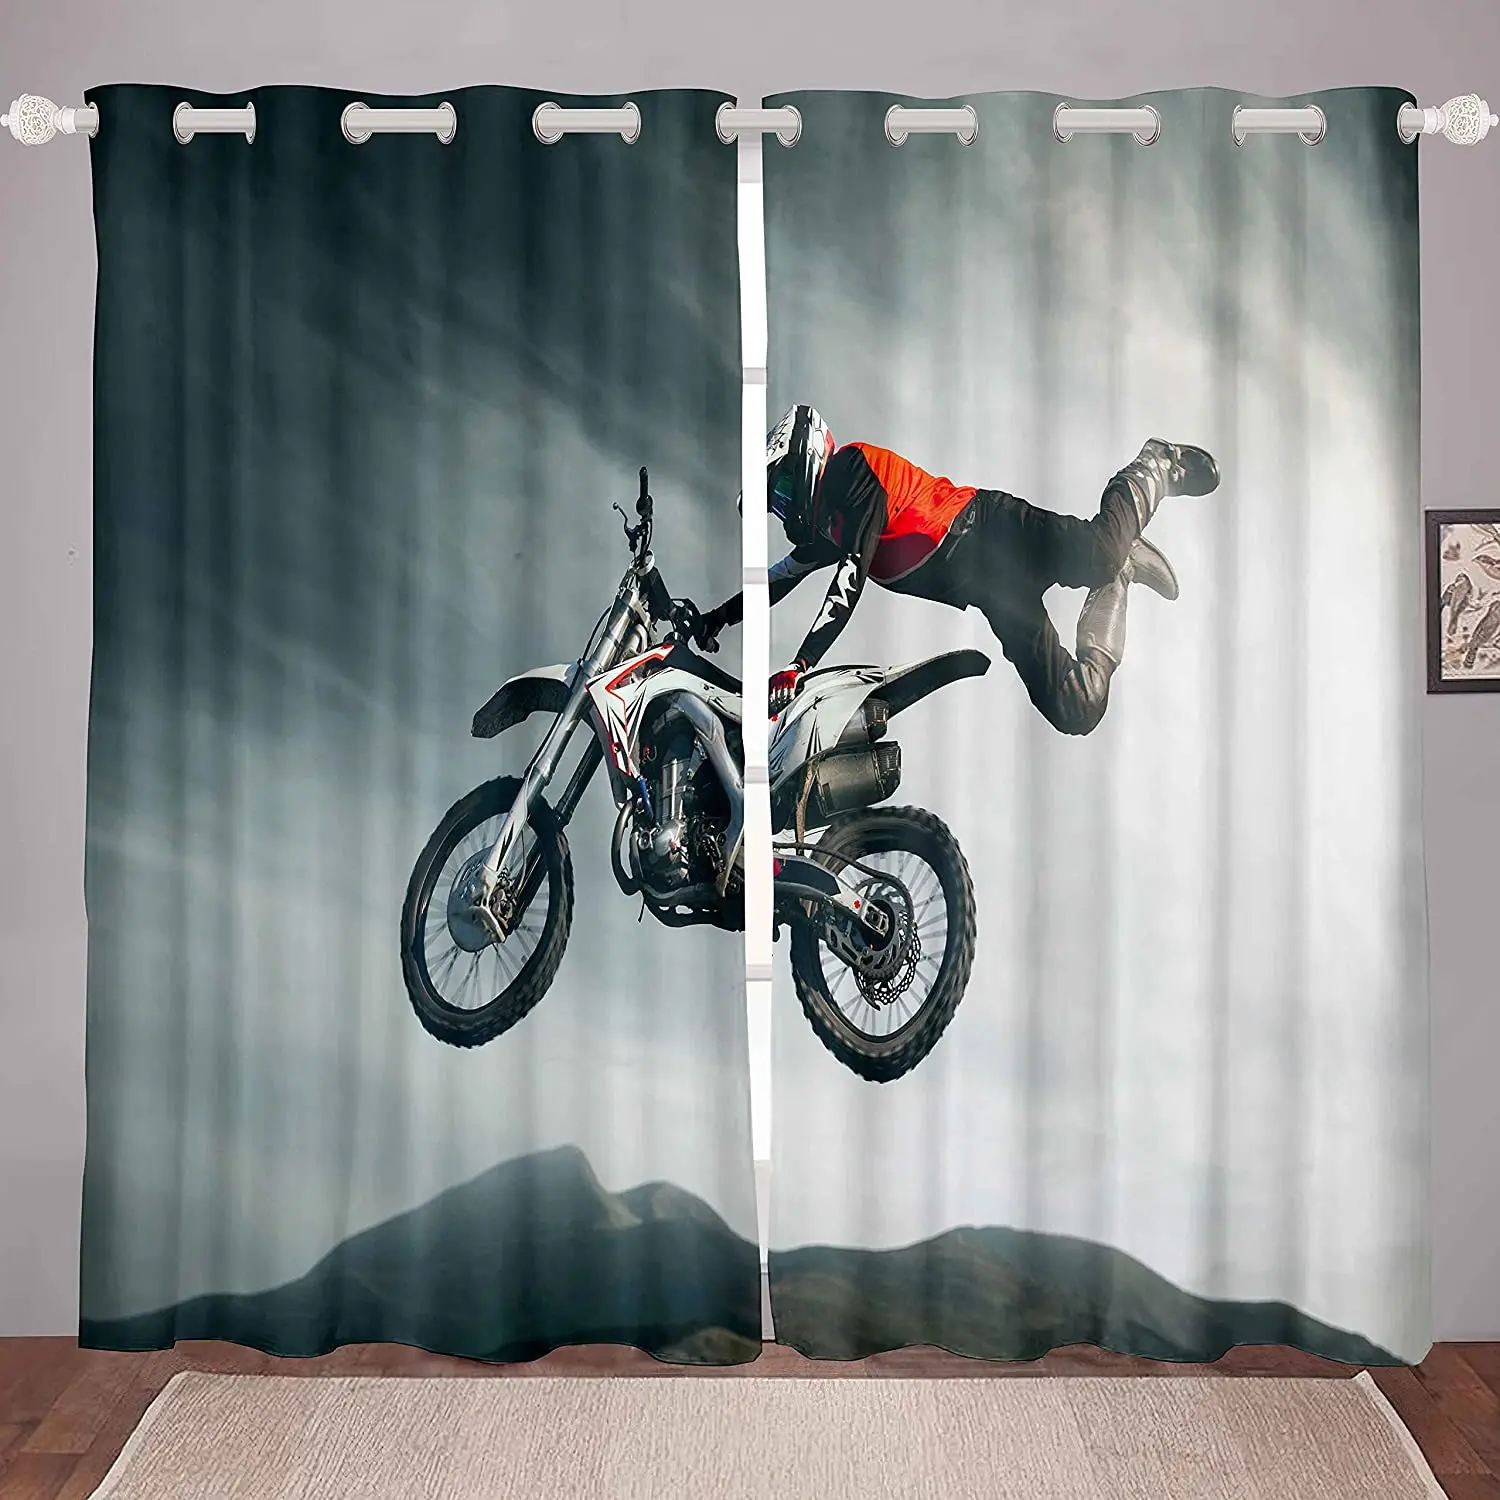 

Motocross Rider Curtain Extreme Sports Theme Curtains for Boys Bedroom Kids Teens Men Motorcycle Design Window Drapes Dirt Bike